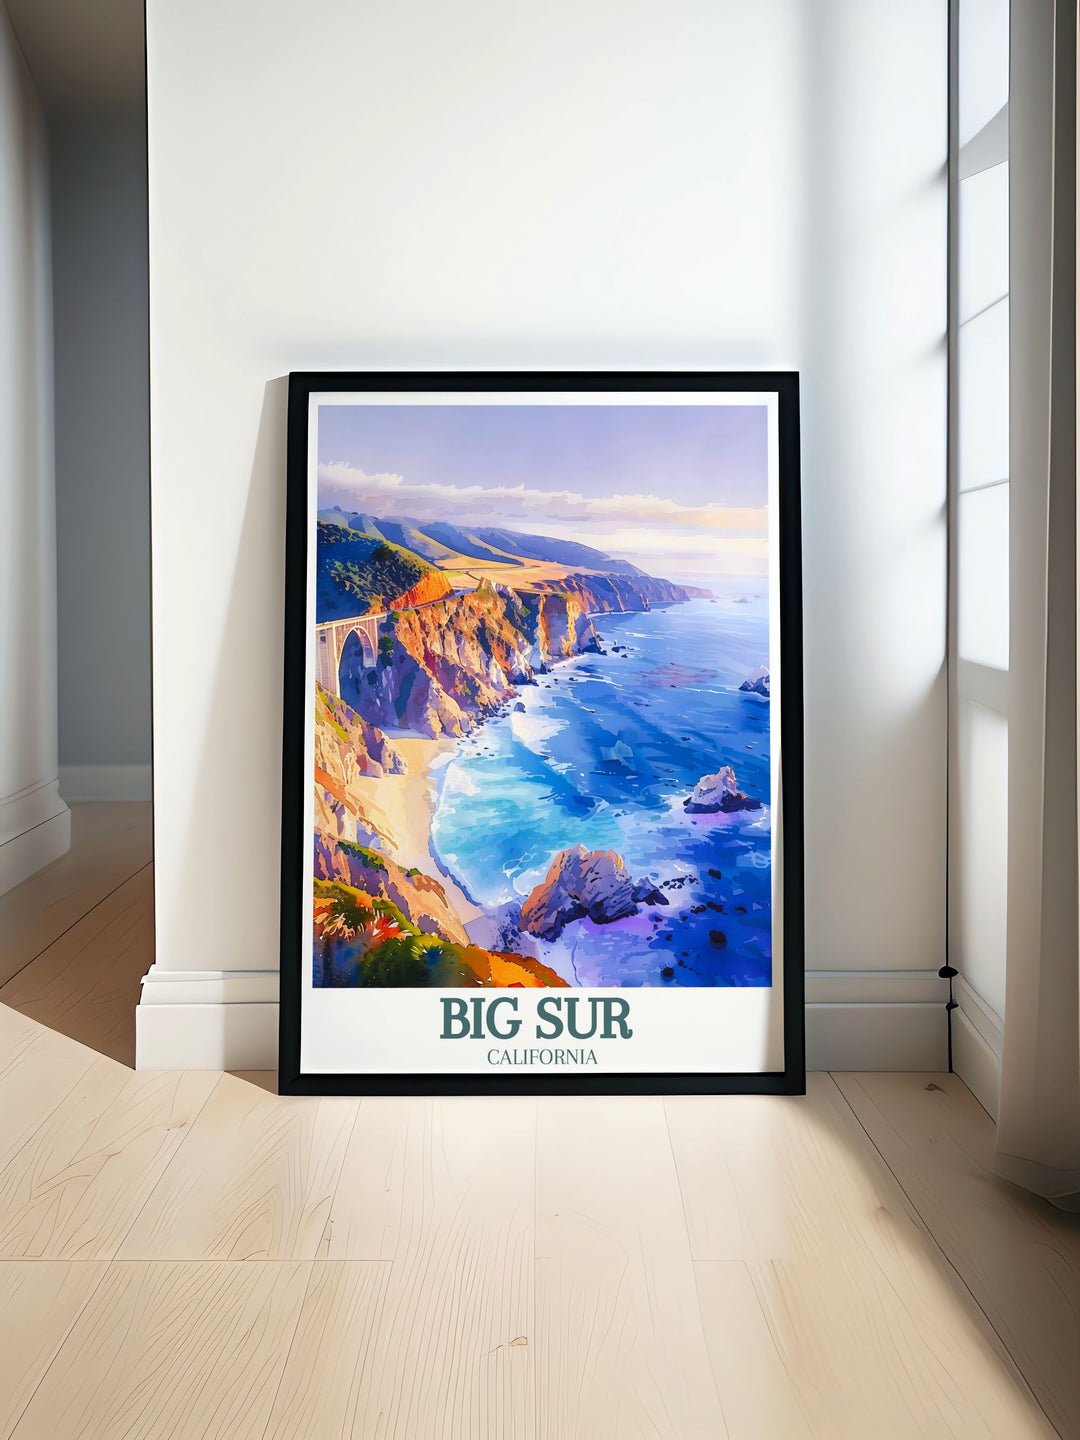 The vibrant coastline of Big Sur and the historic elegance of Bixby Creek Bridge are depicted in this vibrant travel poster, offering a stunning visual of Californias diverse coastal attractions.